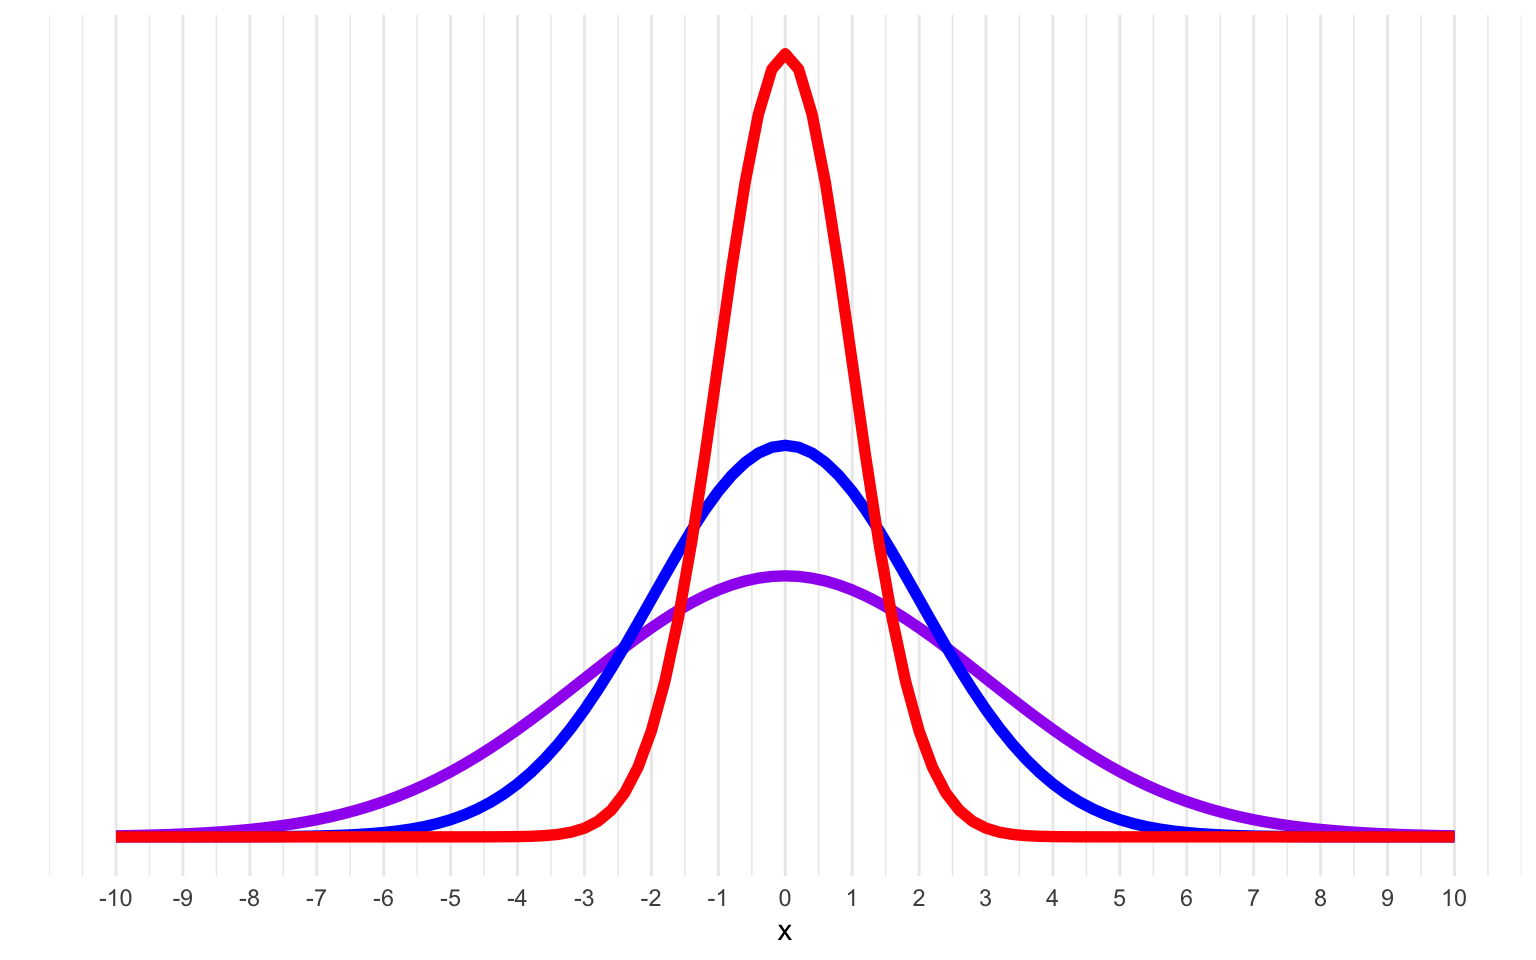 Normal distributions with means of 0 and SDs of 1 (red), 2 (blue) and 3 (purple).